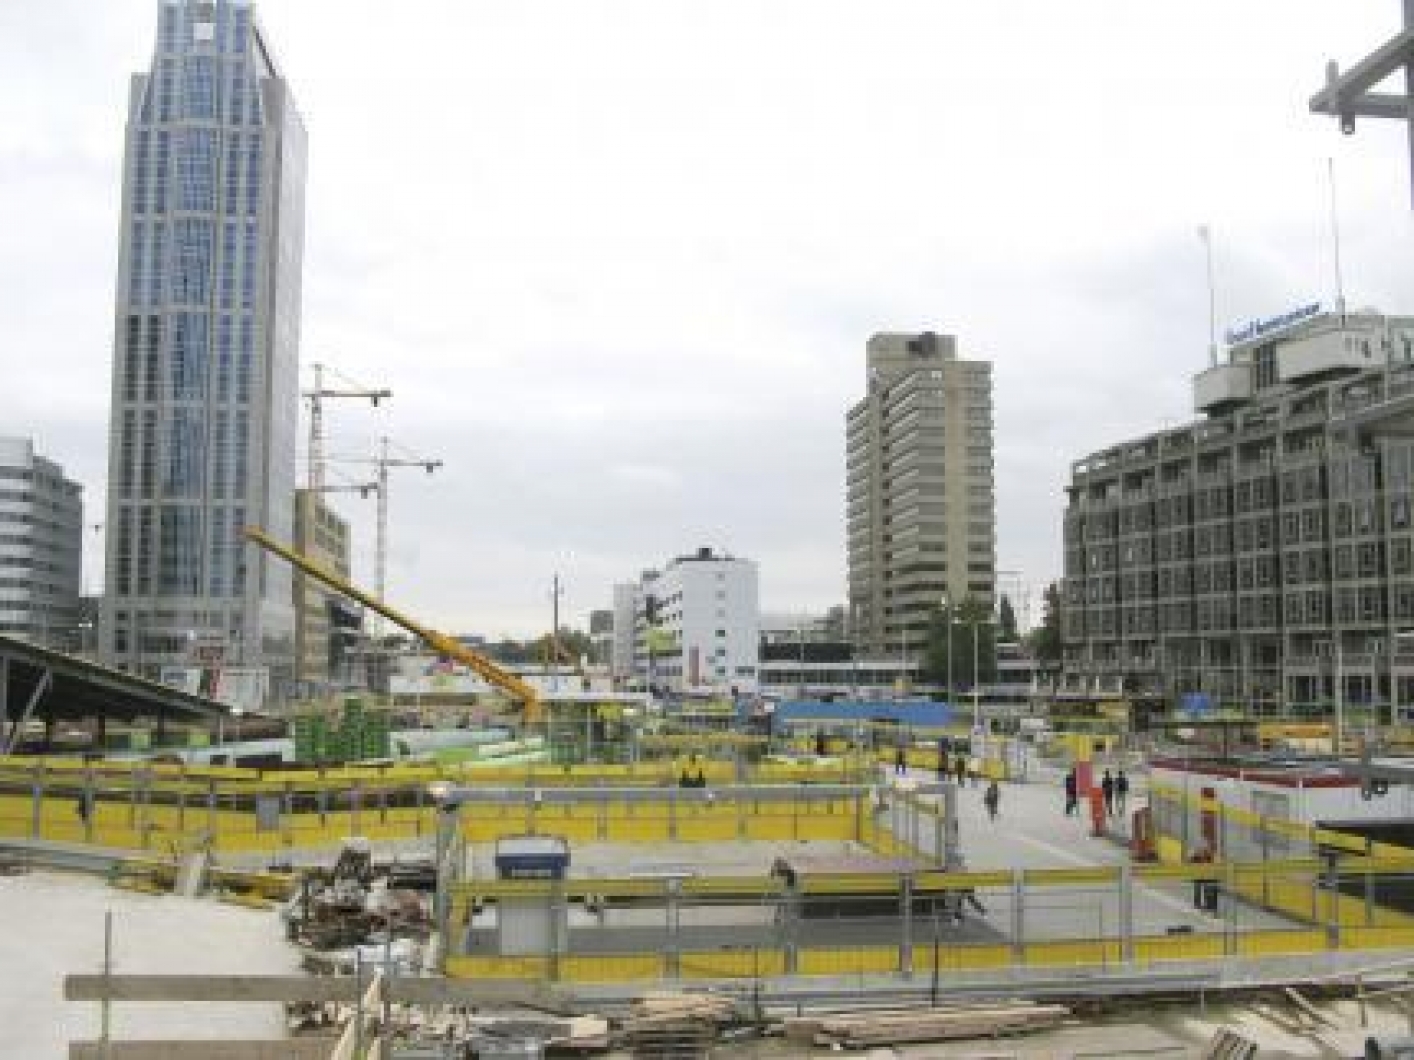 Photo renewal of Rotterdam Central Station area